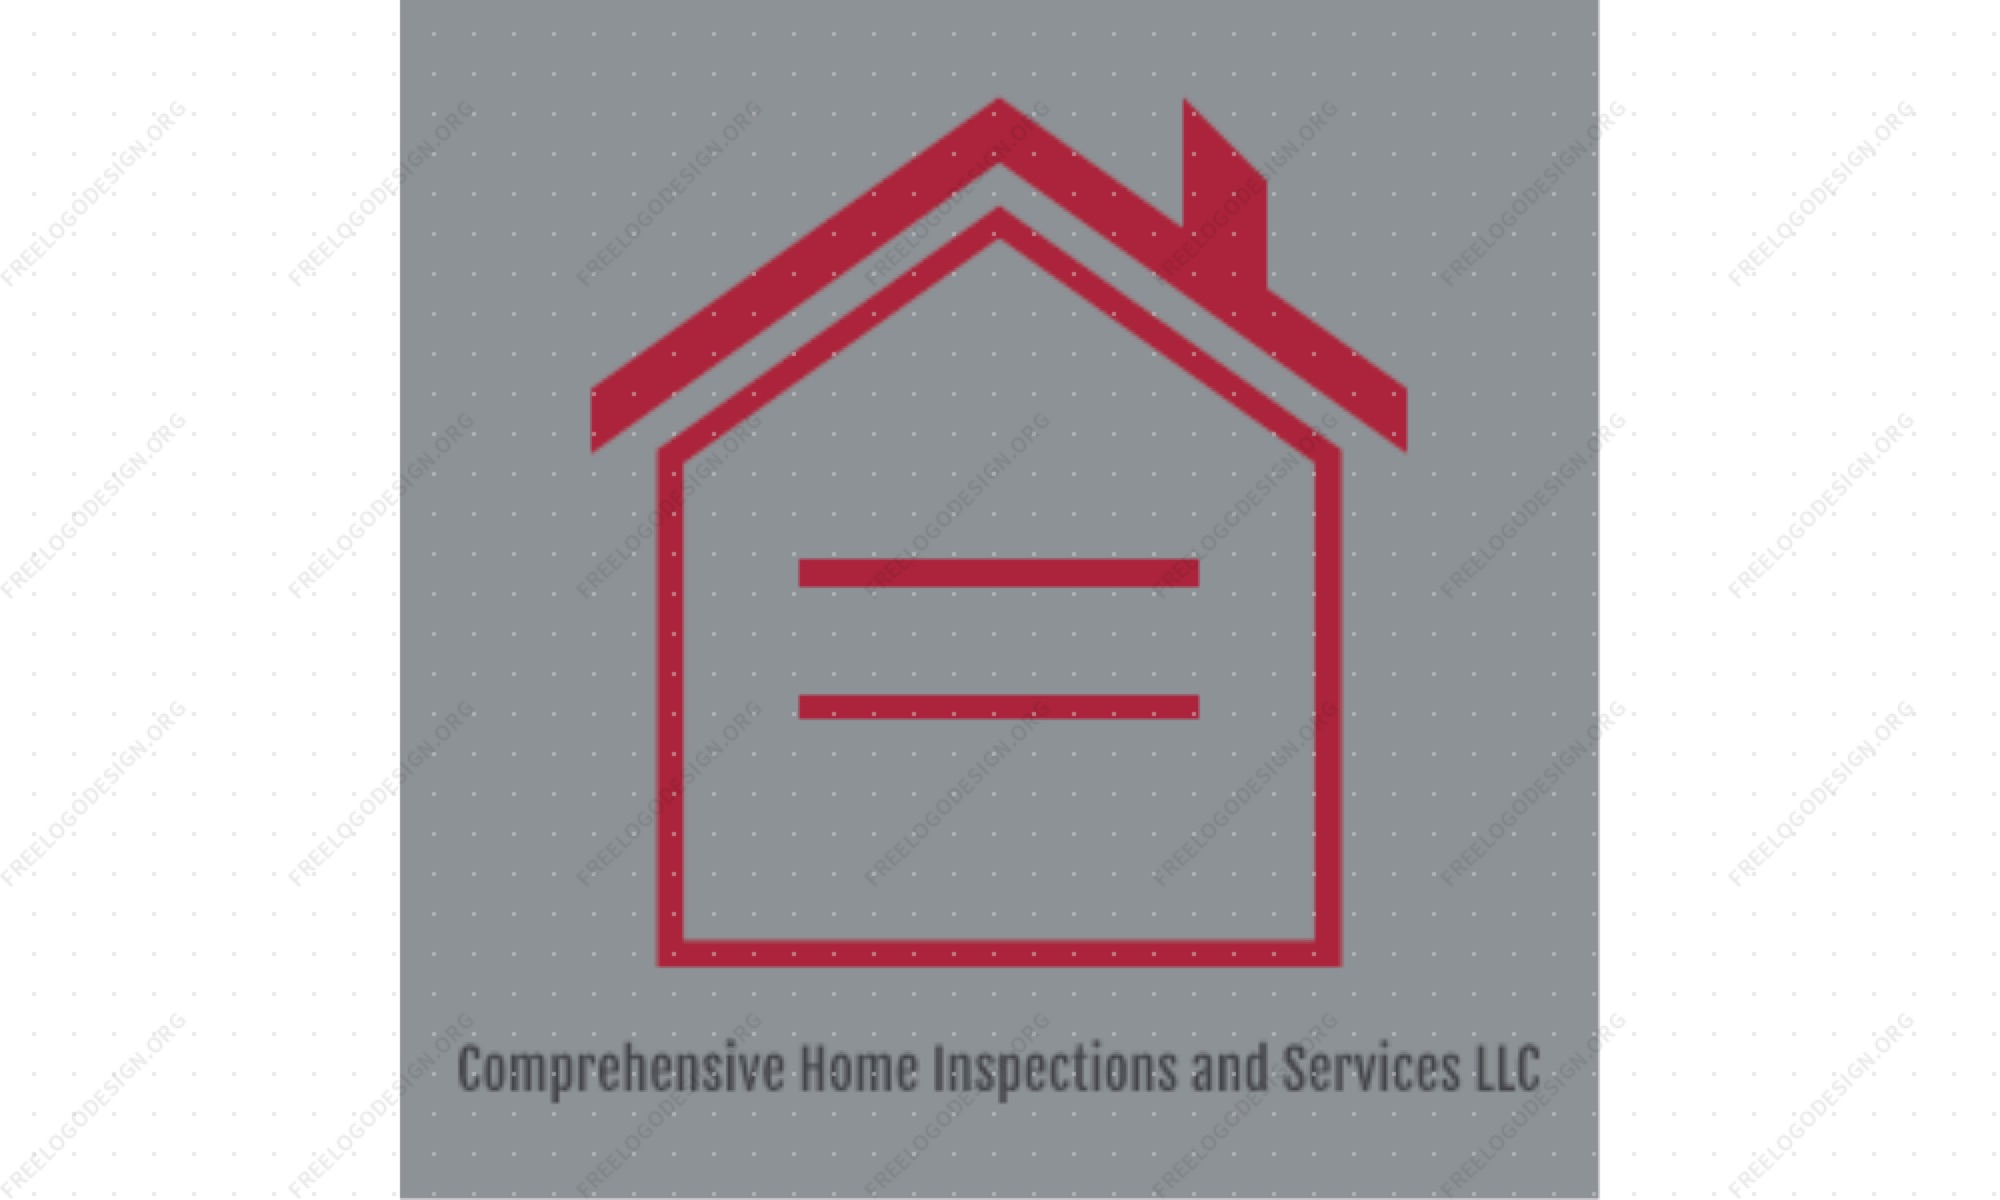 Comprehensive Home Inspections and Services, LLC Logo